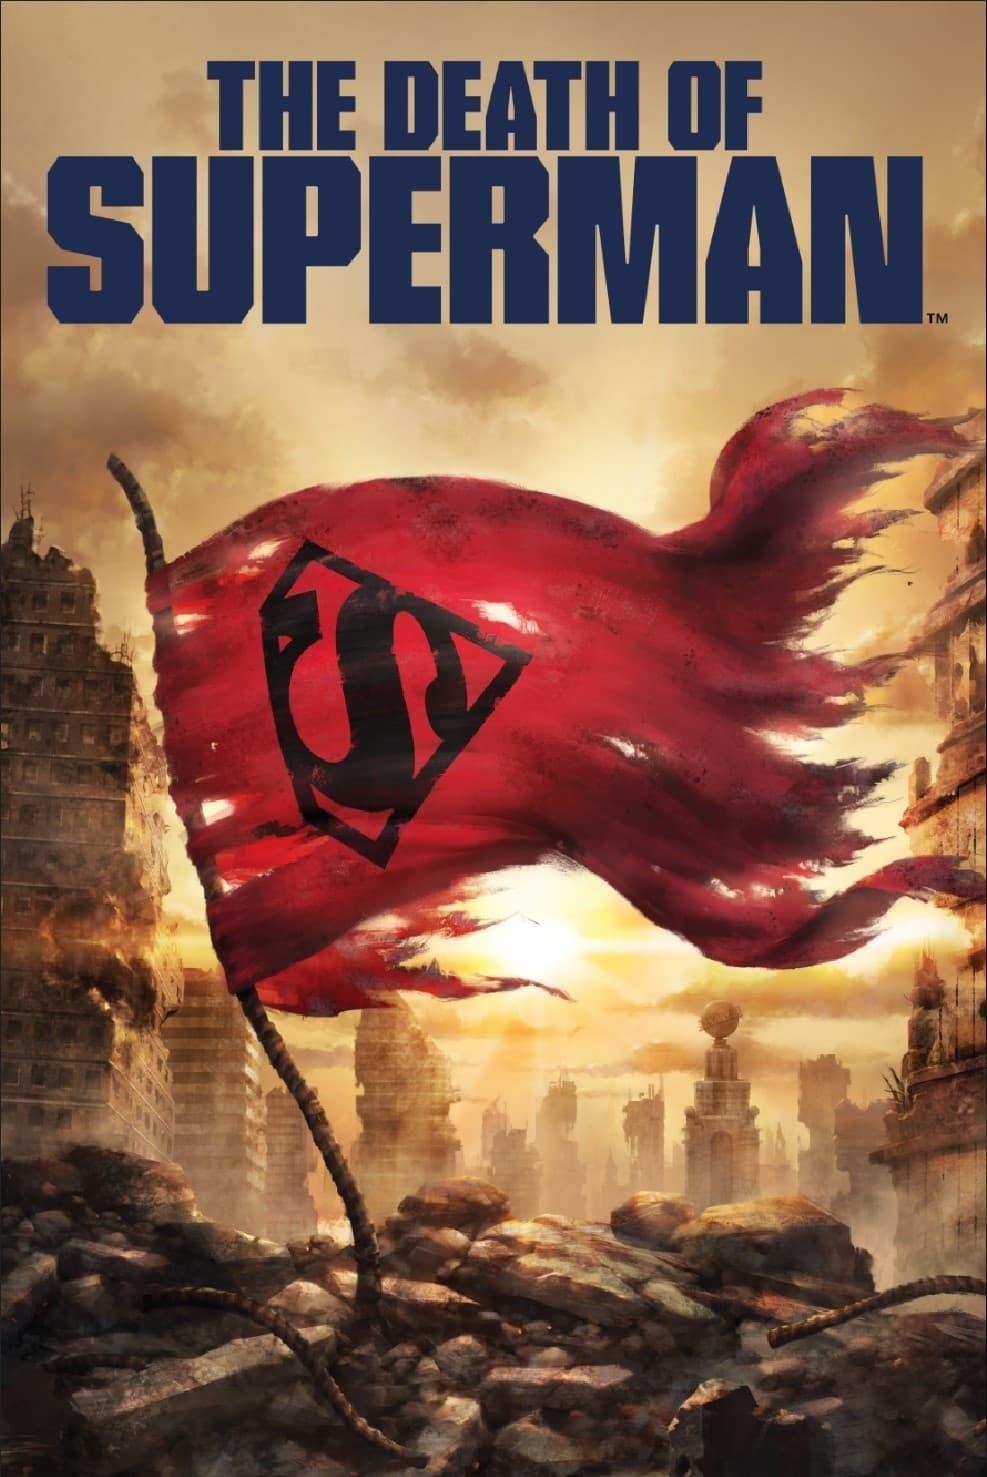 The Death of Superman poster